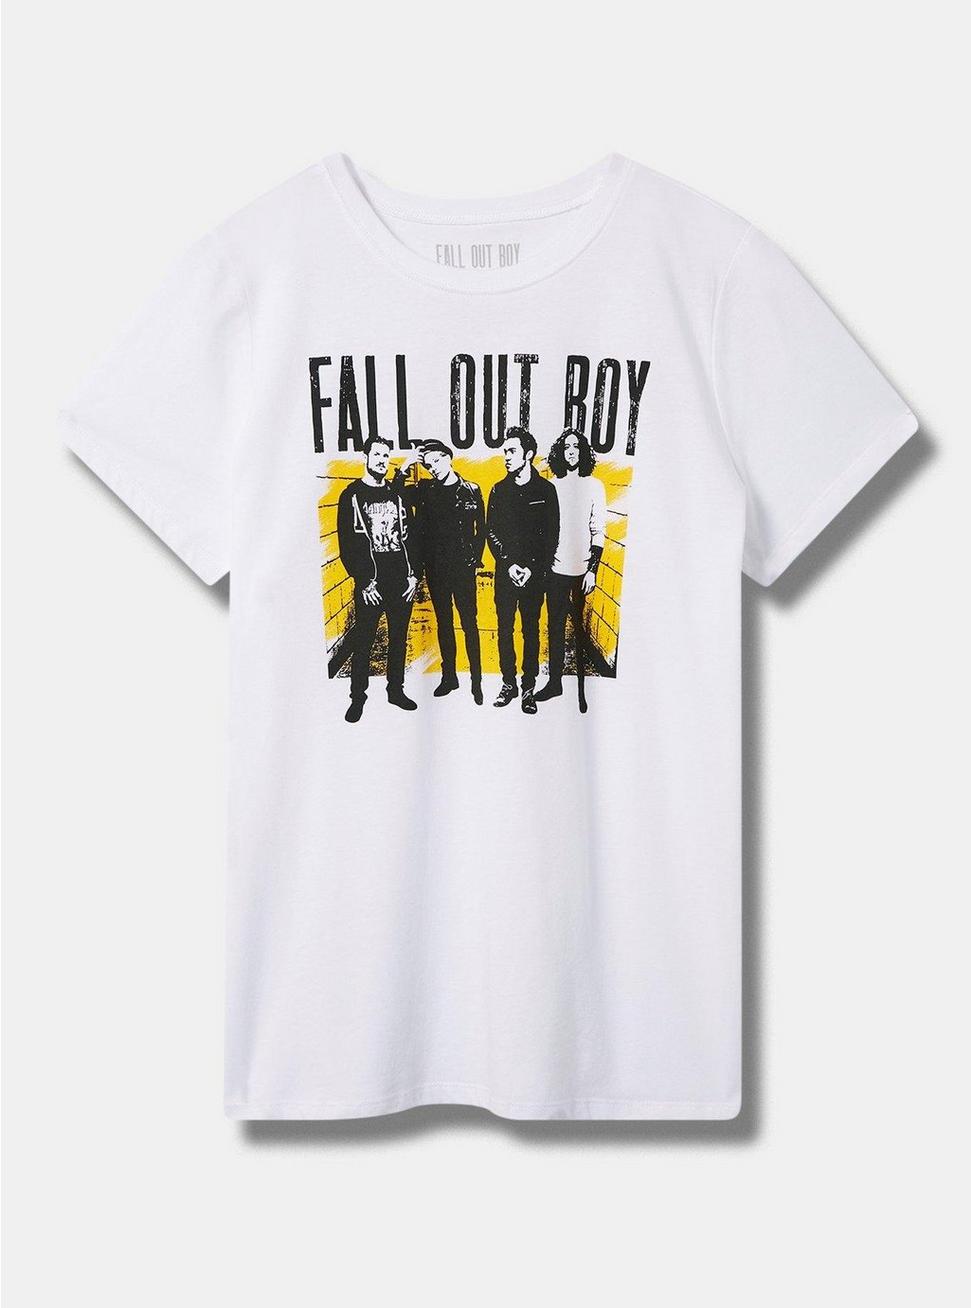 Plus Size Fall Out Boy Classic Fit Cotton Crew Tee, BRIGHT WHITE, hi-res